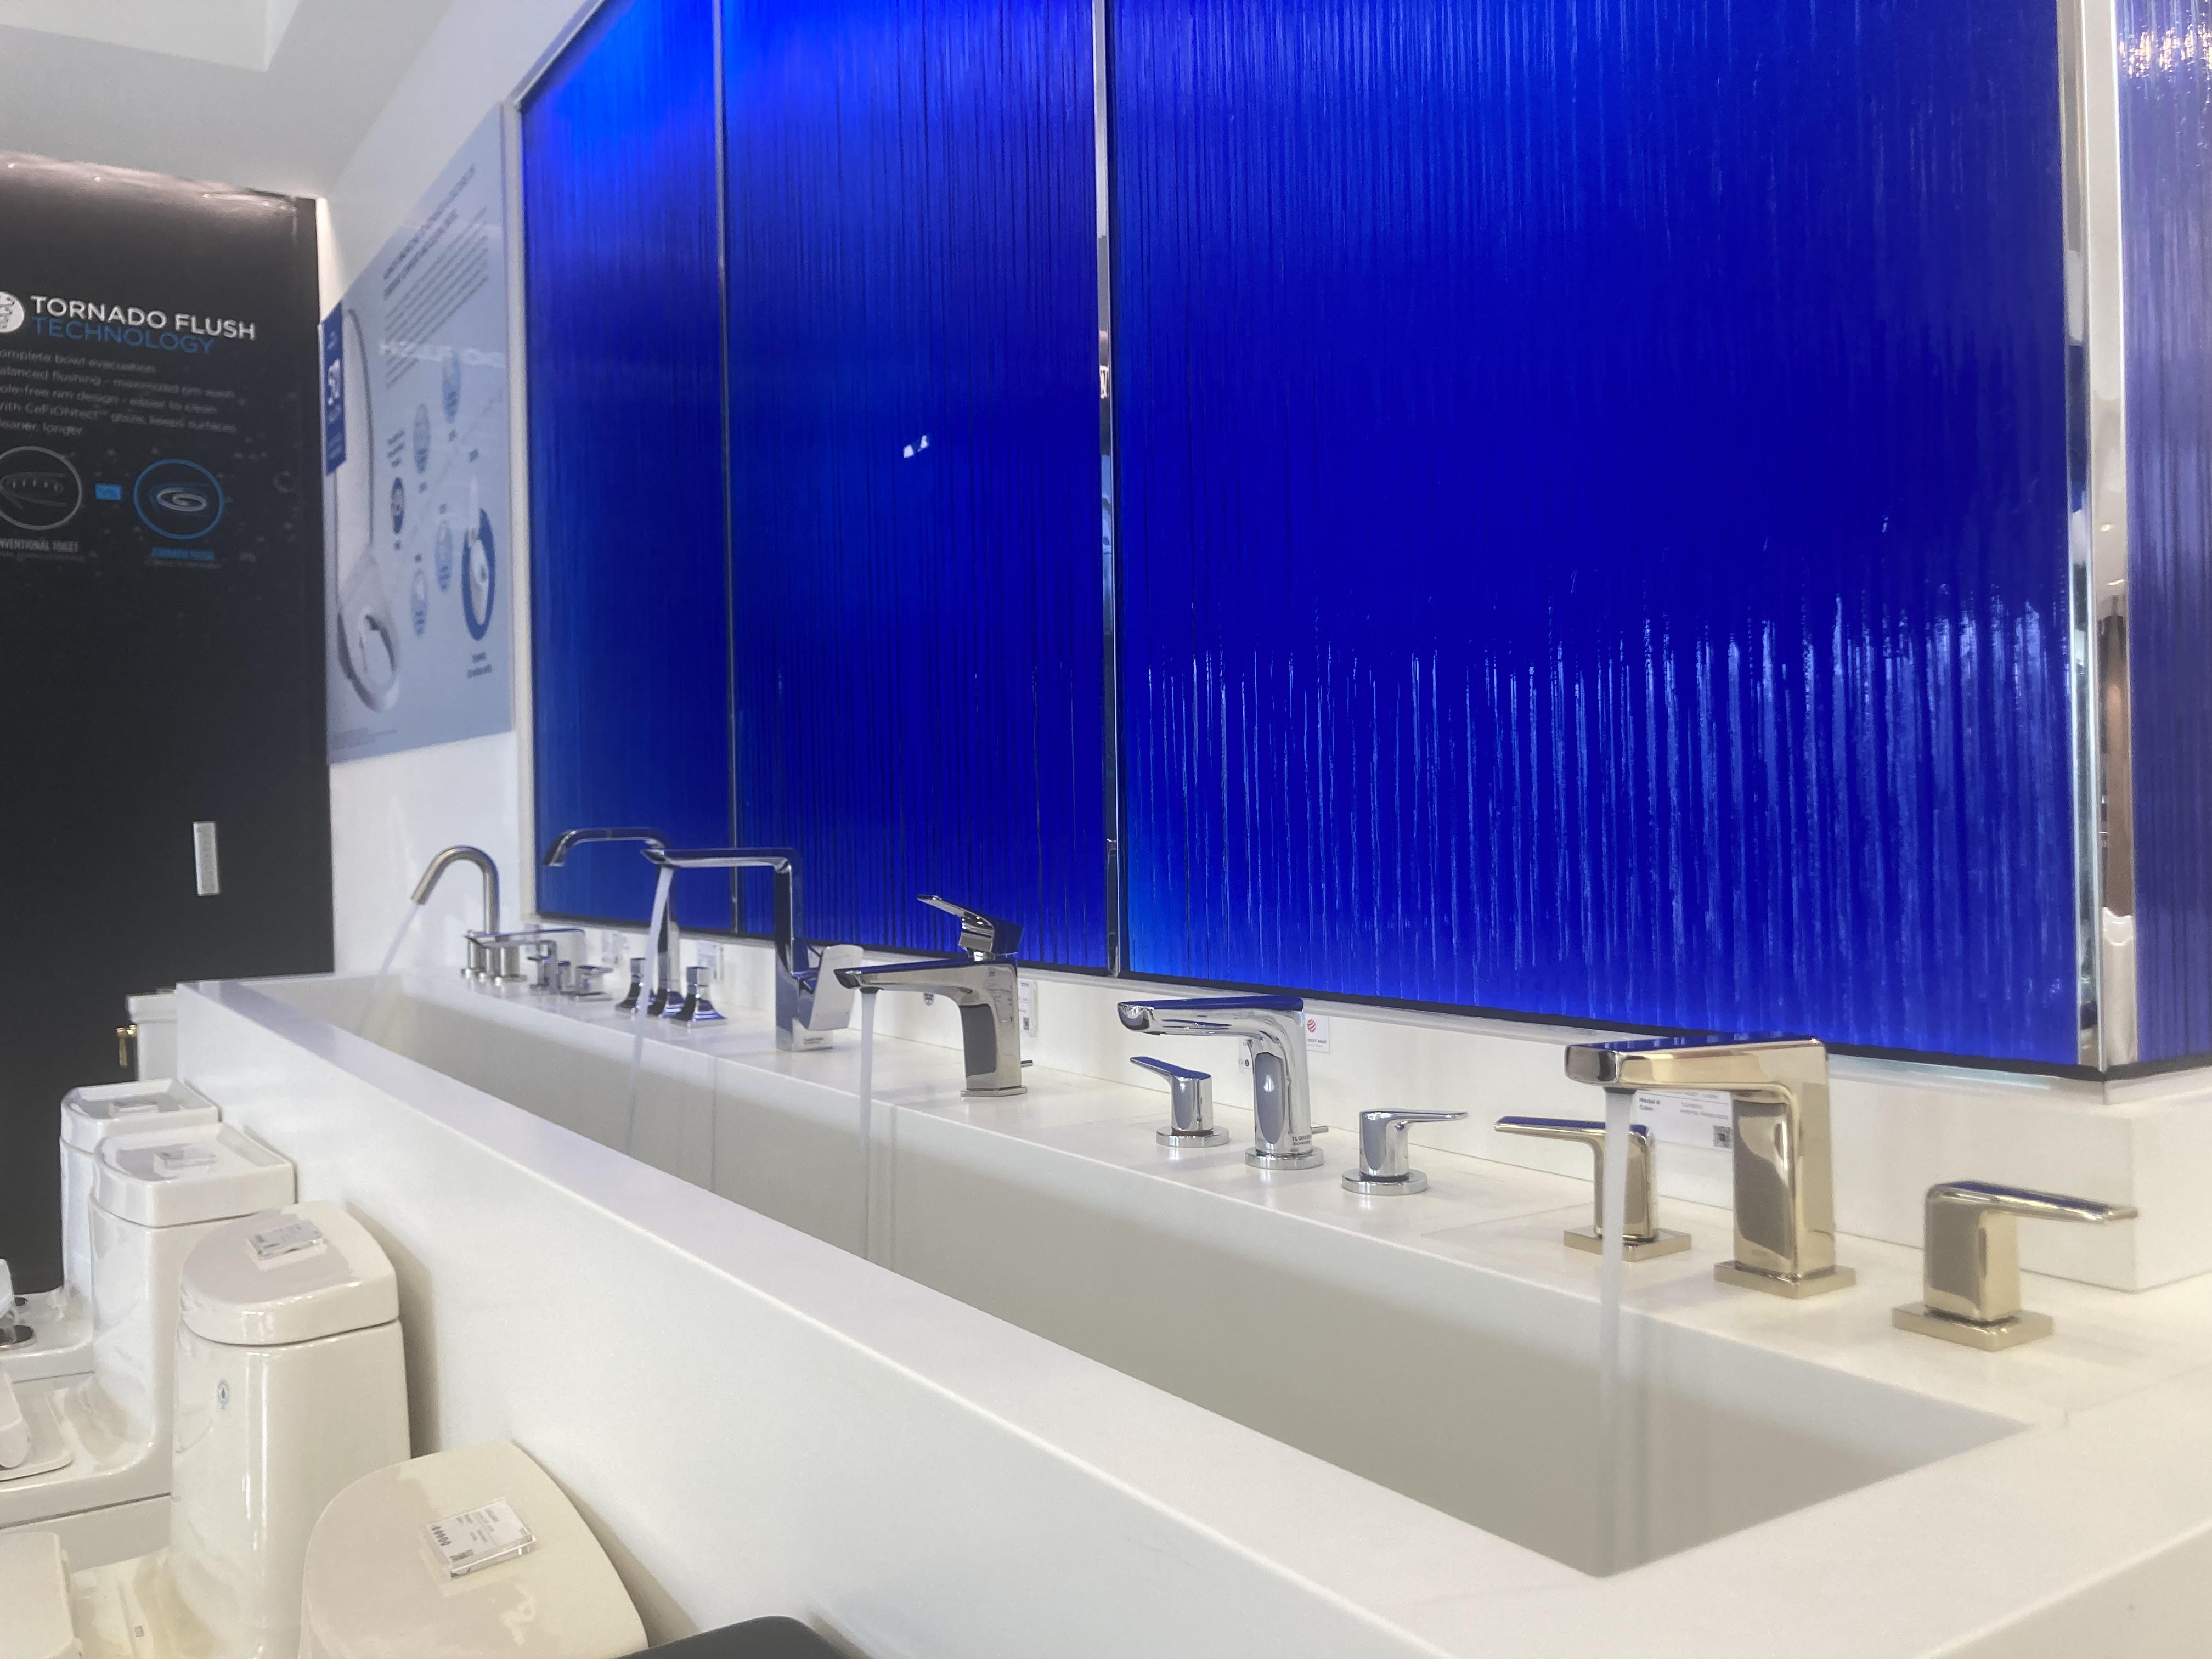 Faucets on display in front of blue textured glass